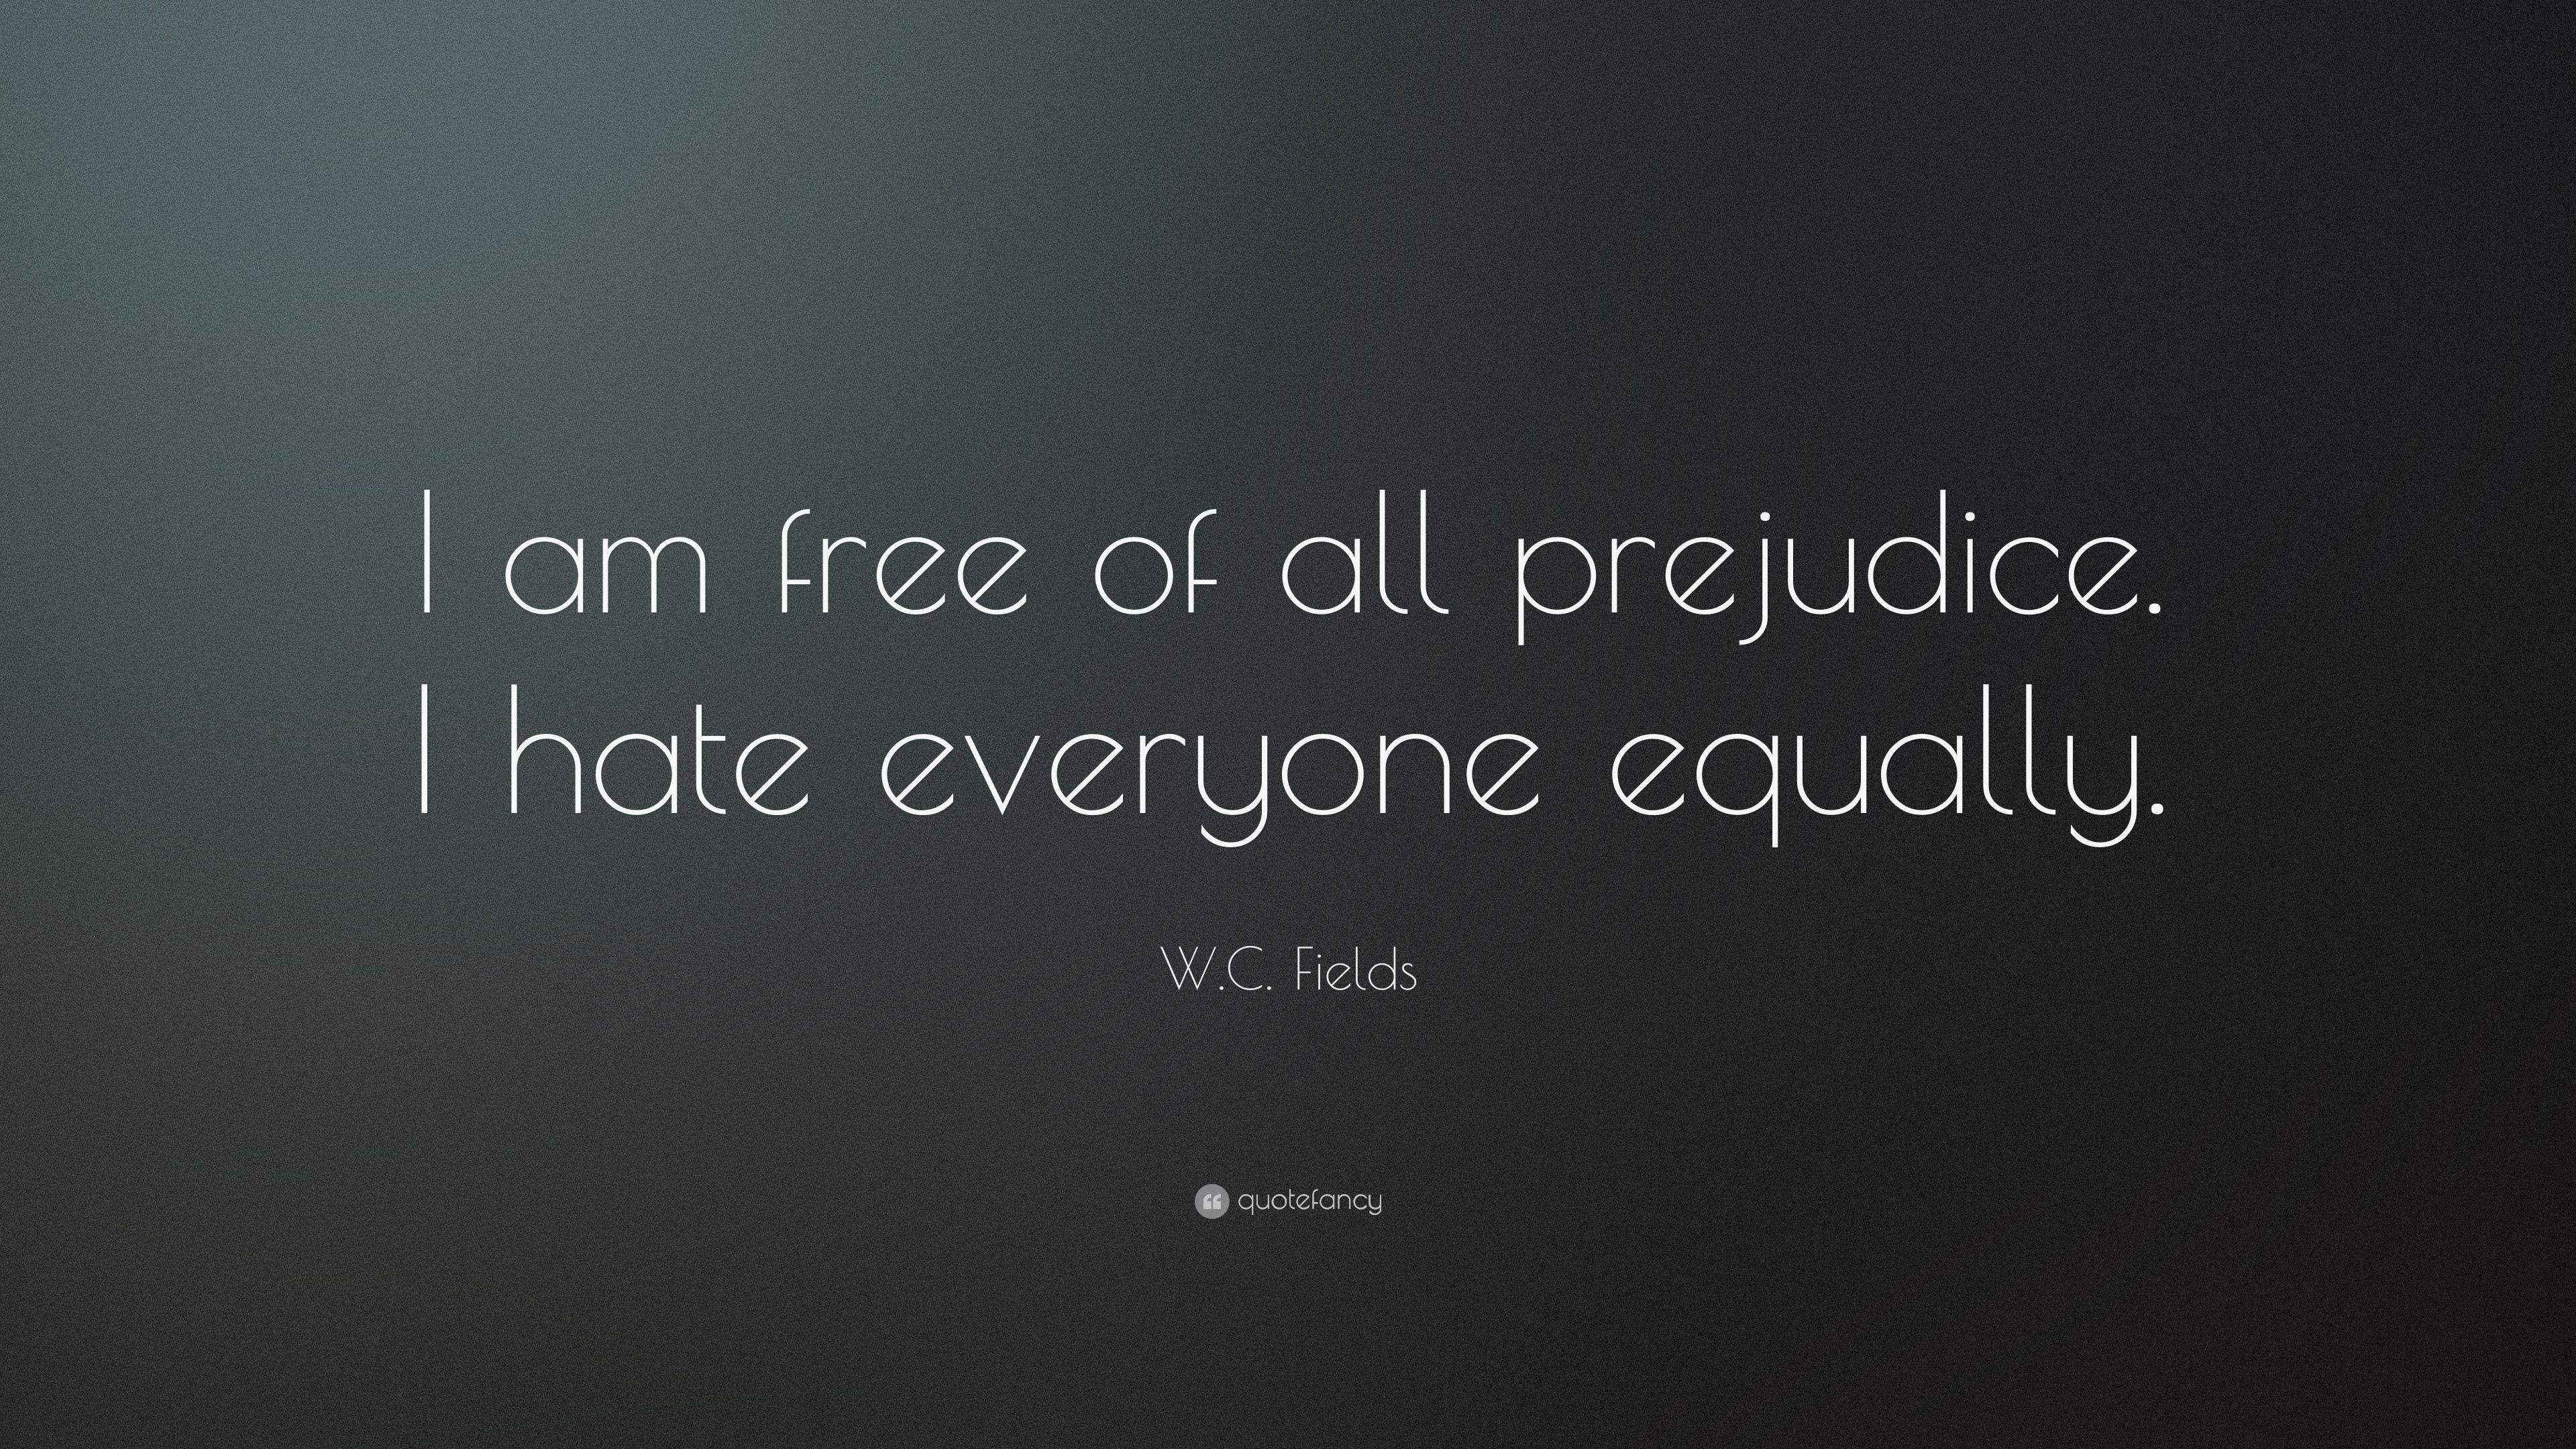 W. C. Fields Quote: “I am free of all prejudice. I hate everyone equally. ” (13 wallpaper)